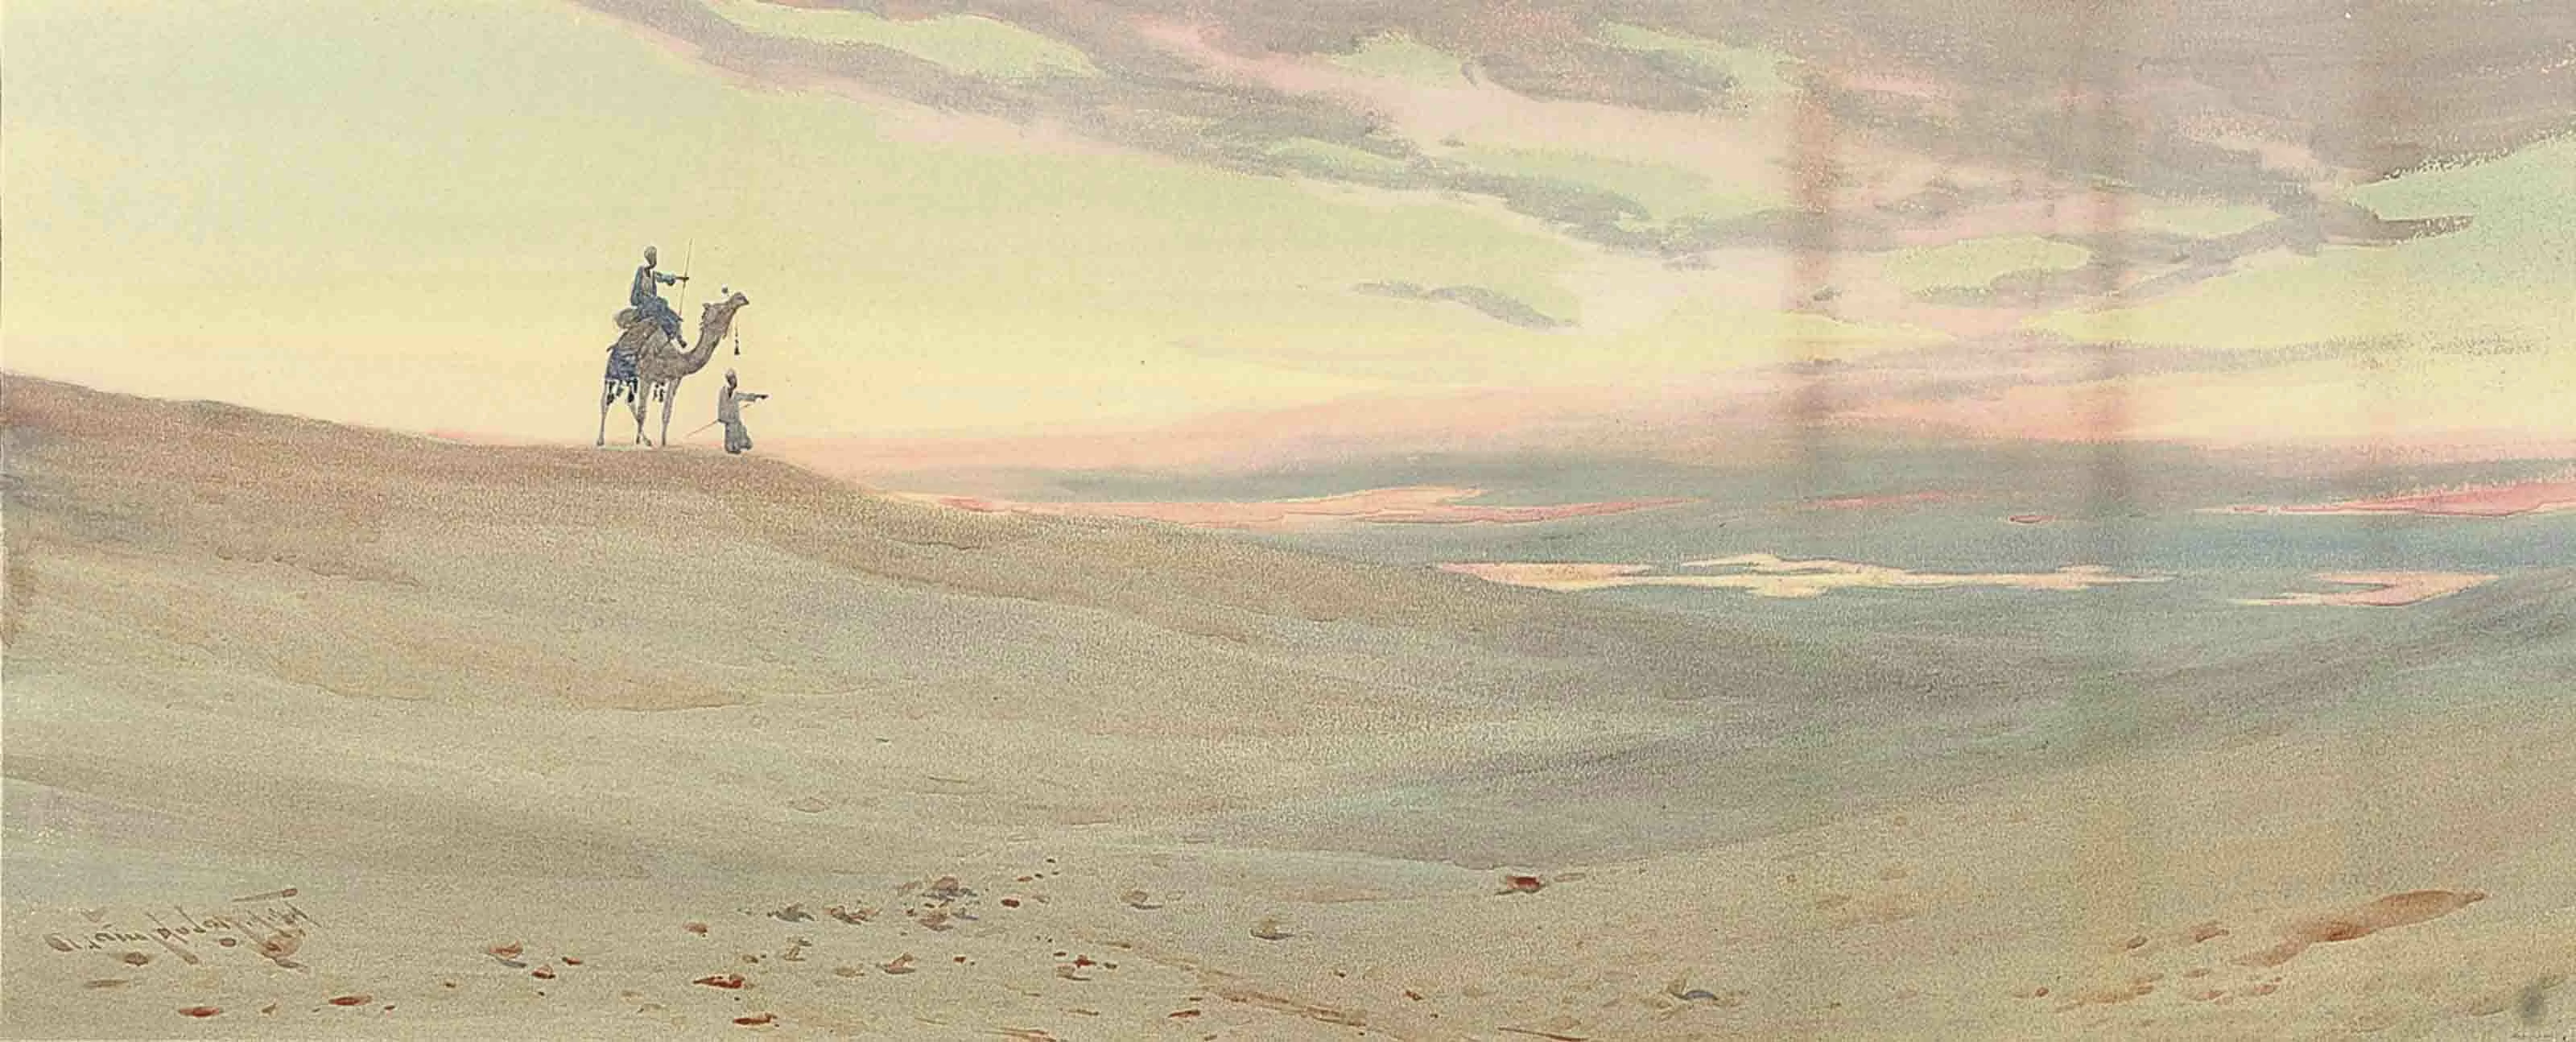 Arabs in the desert at dusk; and A felucca on the Nile, Augustus Osborne Lamplough